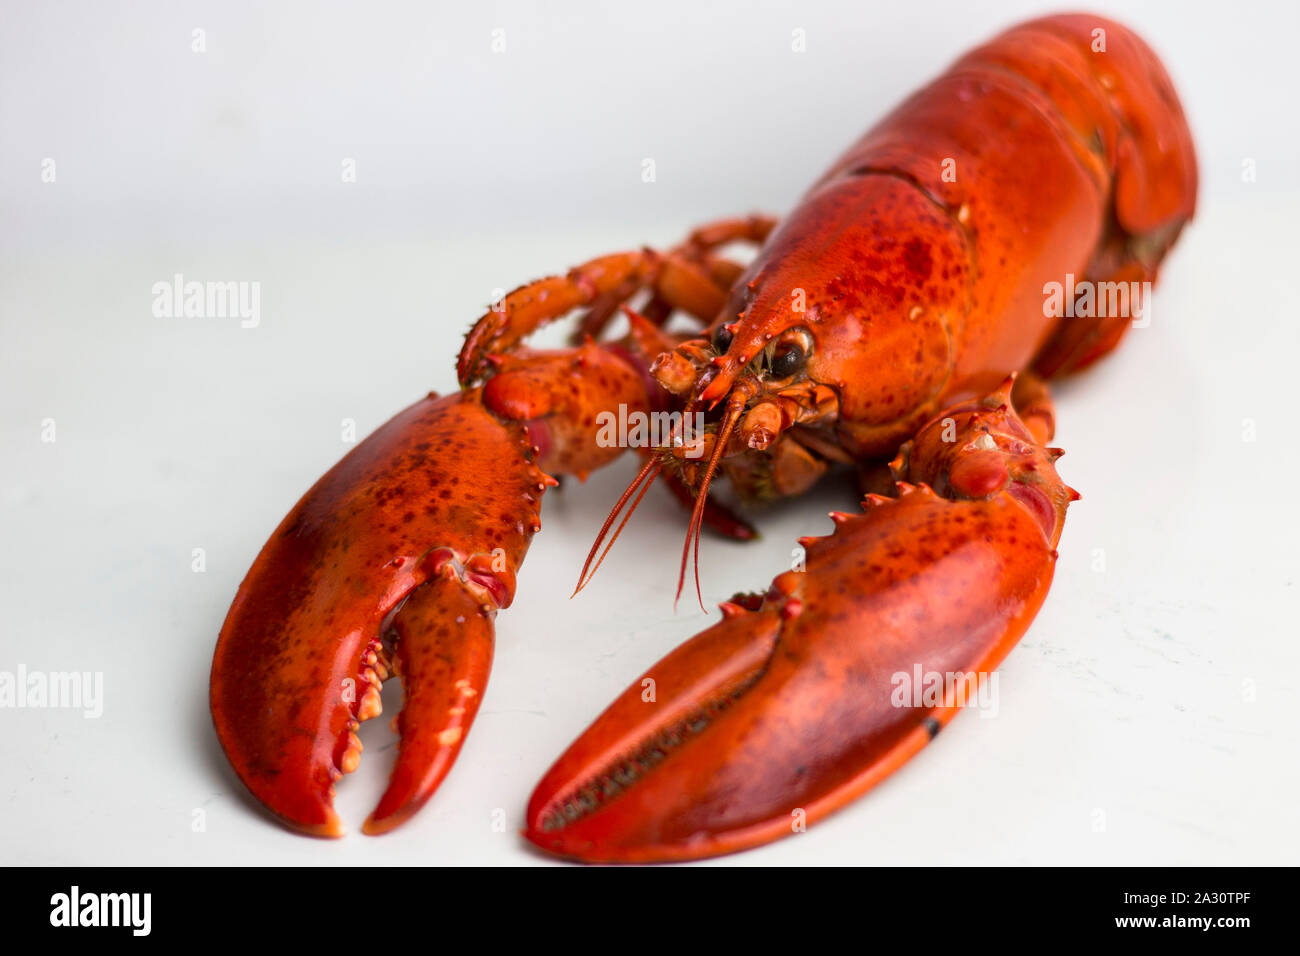 Whole red lobster ready to eat. Stock Photo